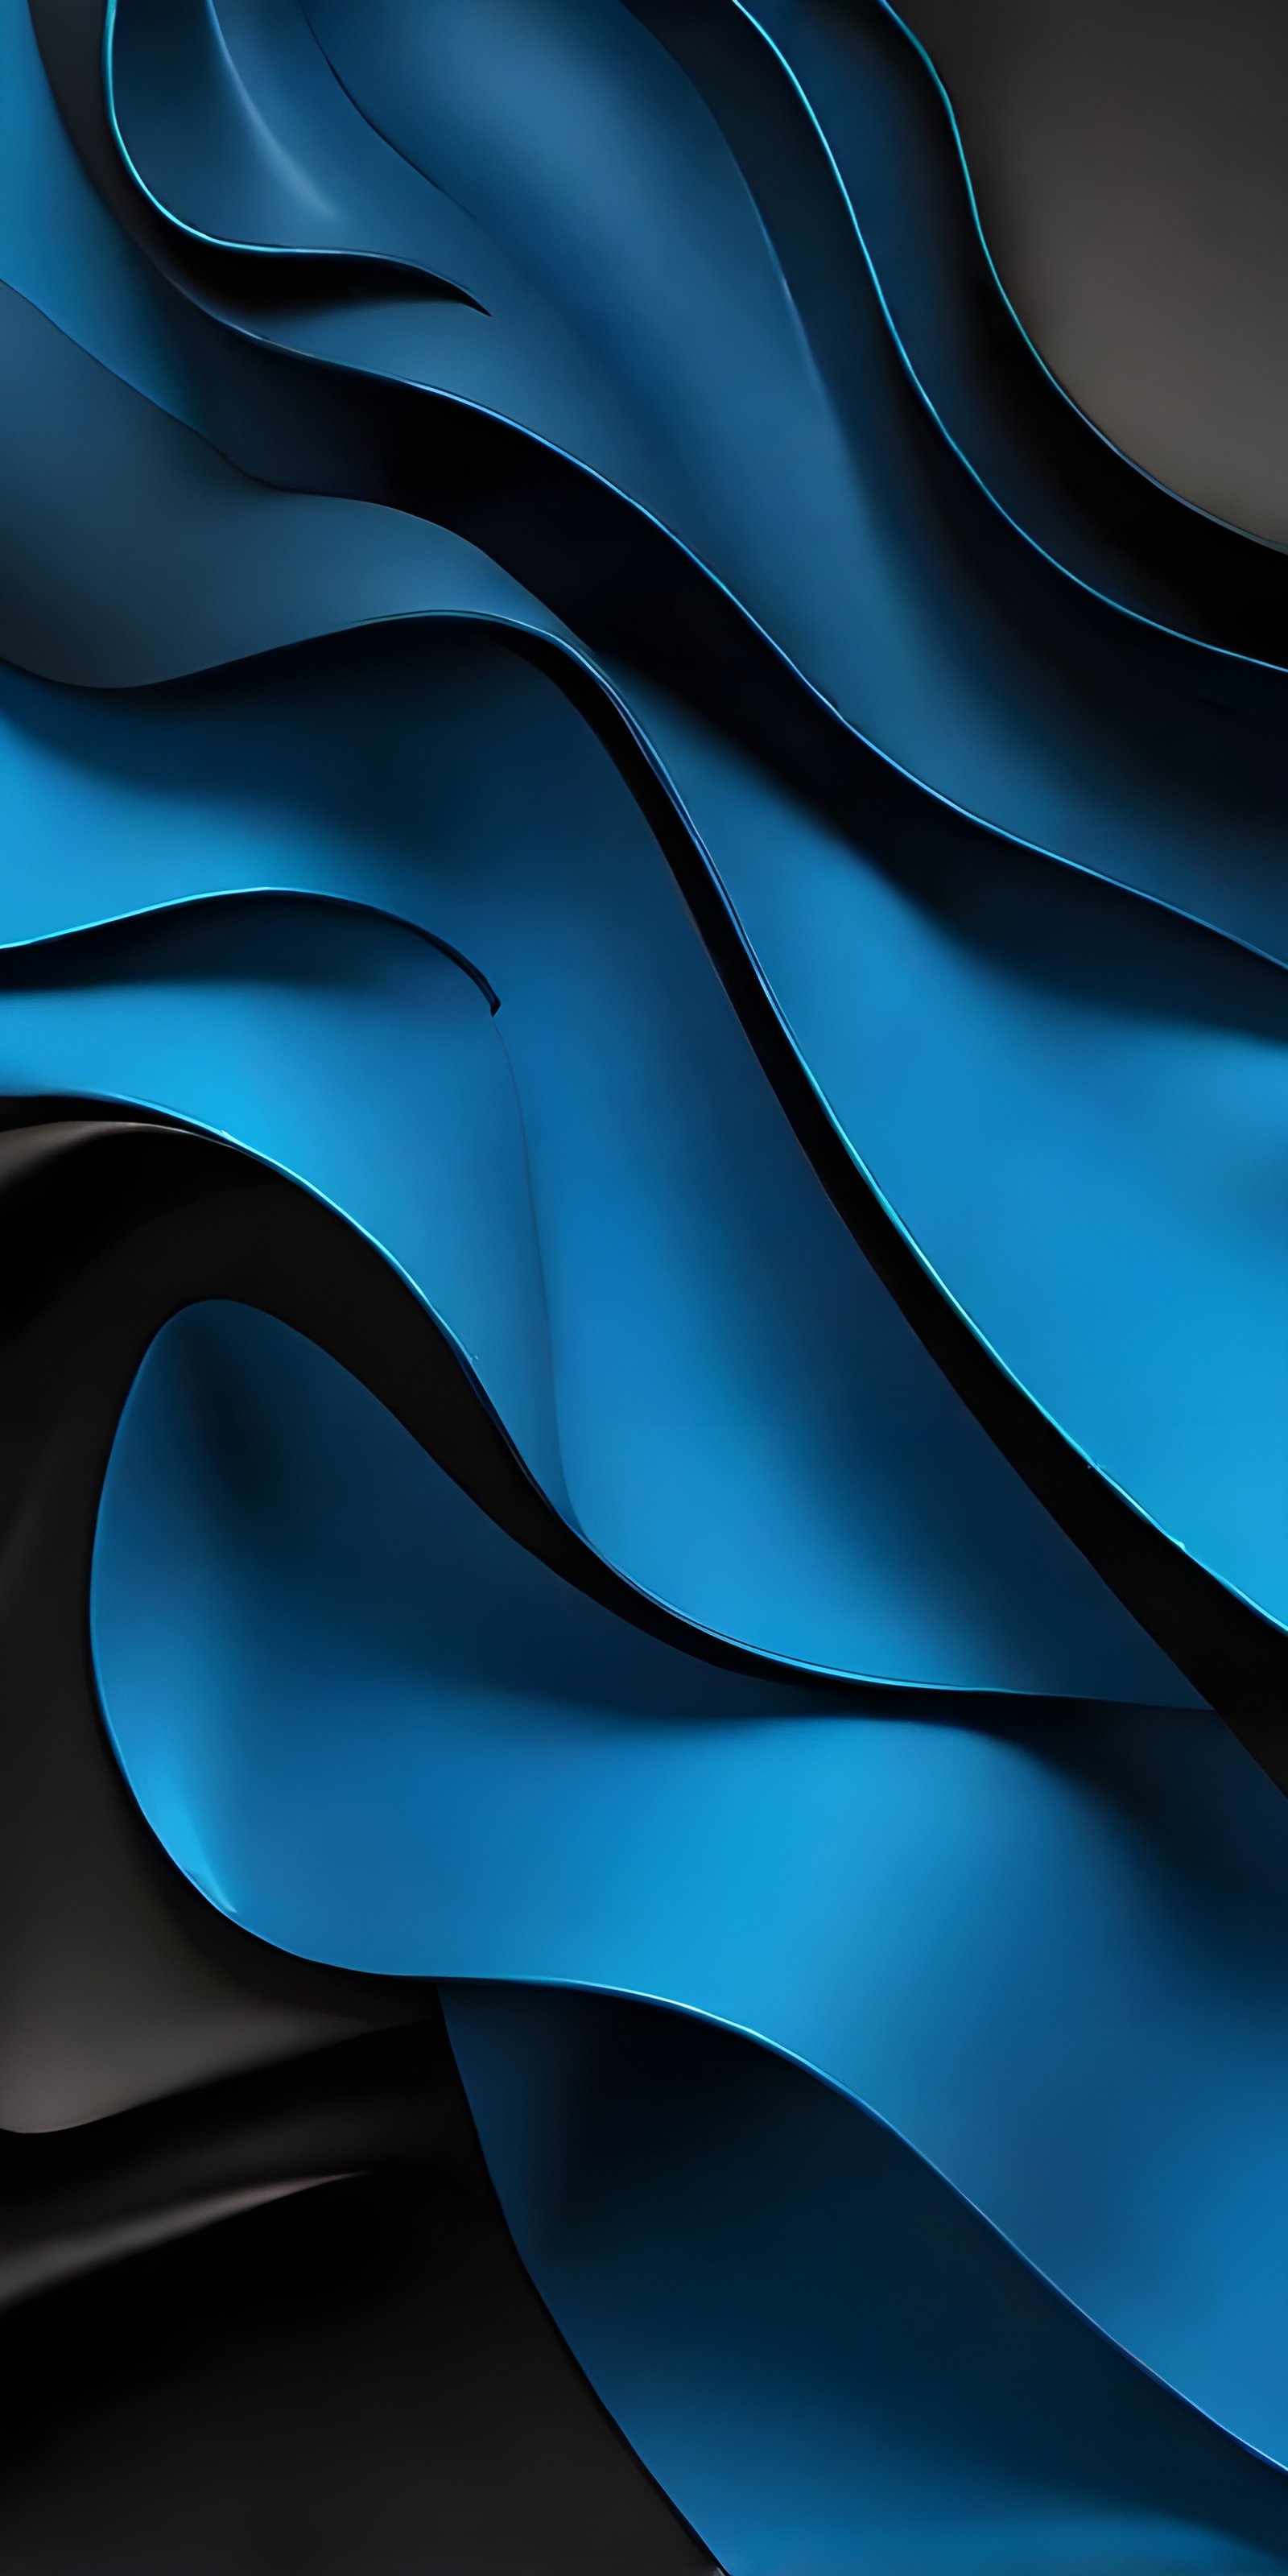 Beautiful Abstract Phone Wallpaper Blue and Black